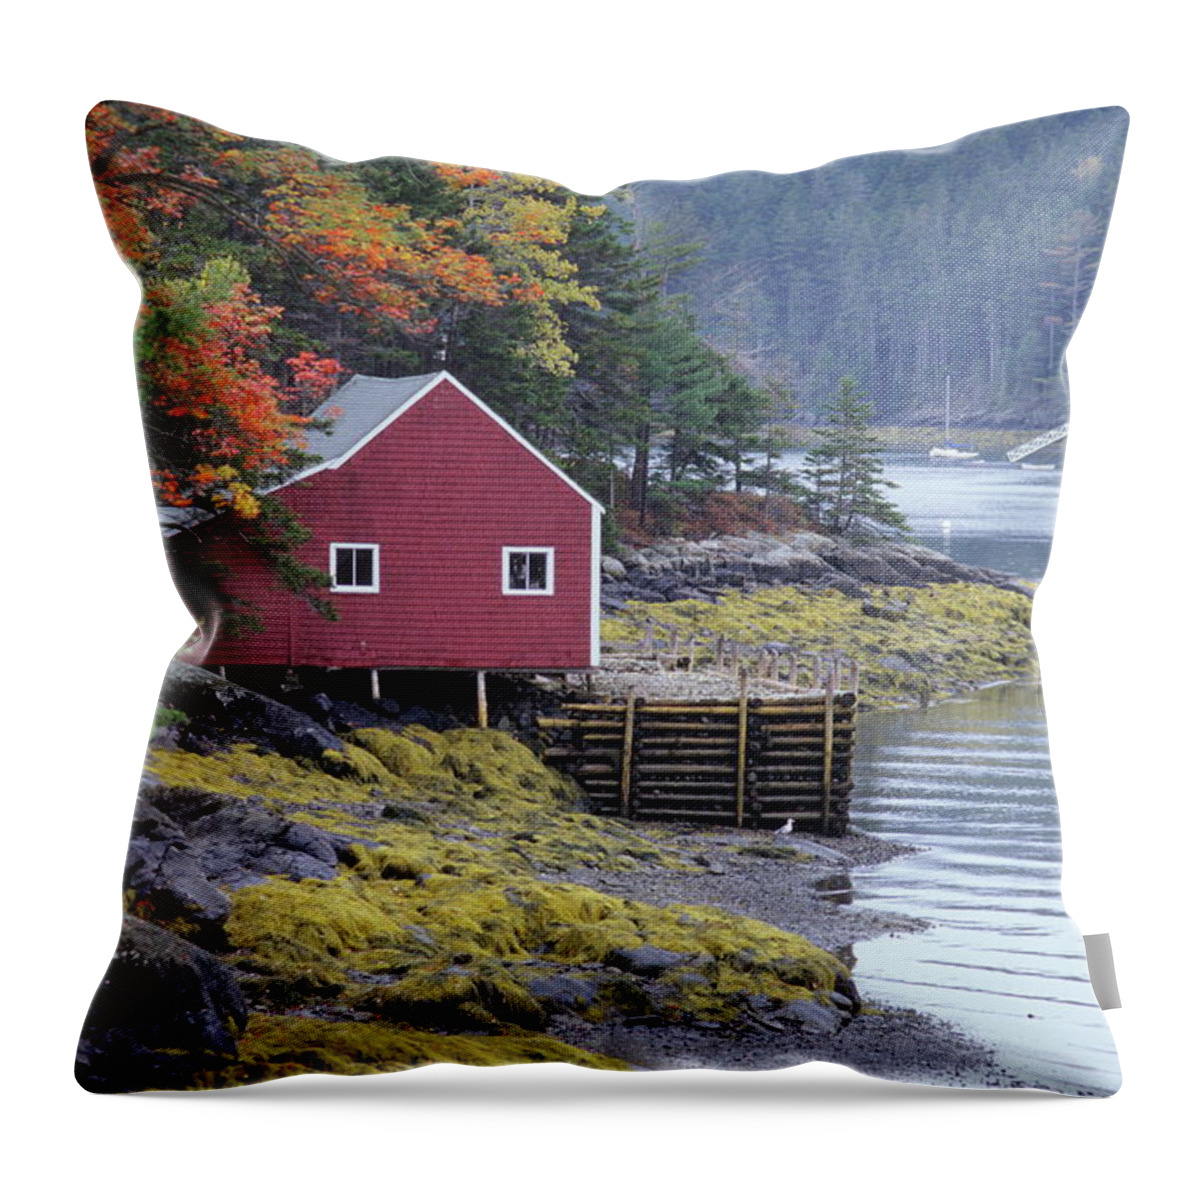 Tranquility Throw Pillow featuring the photograph Boat House, Deer Island by Franz Marc Frei